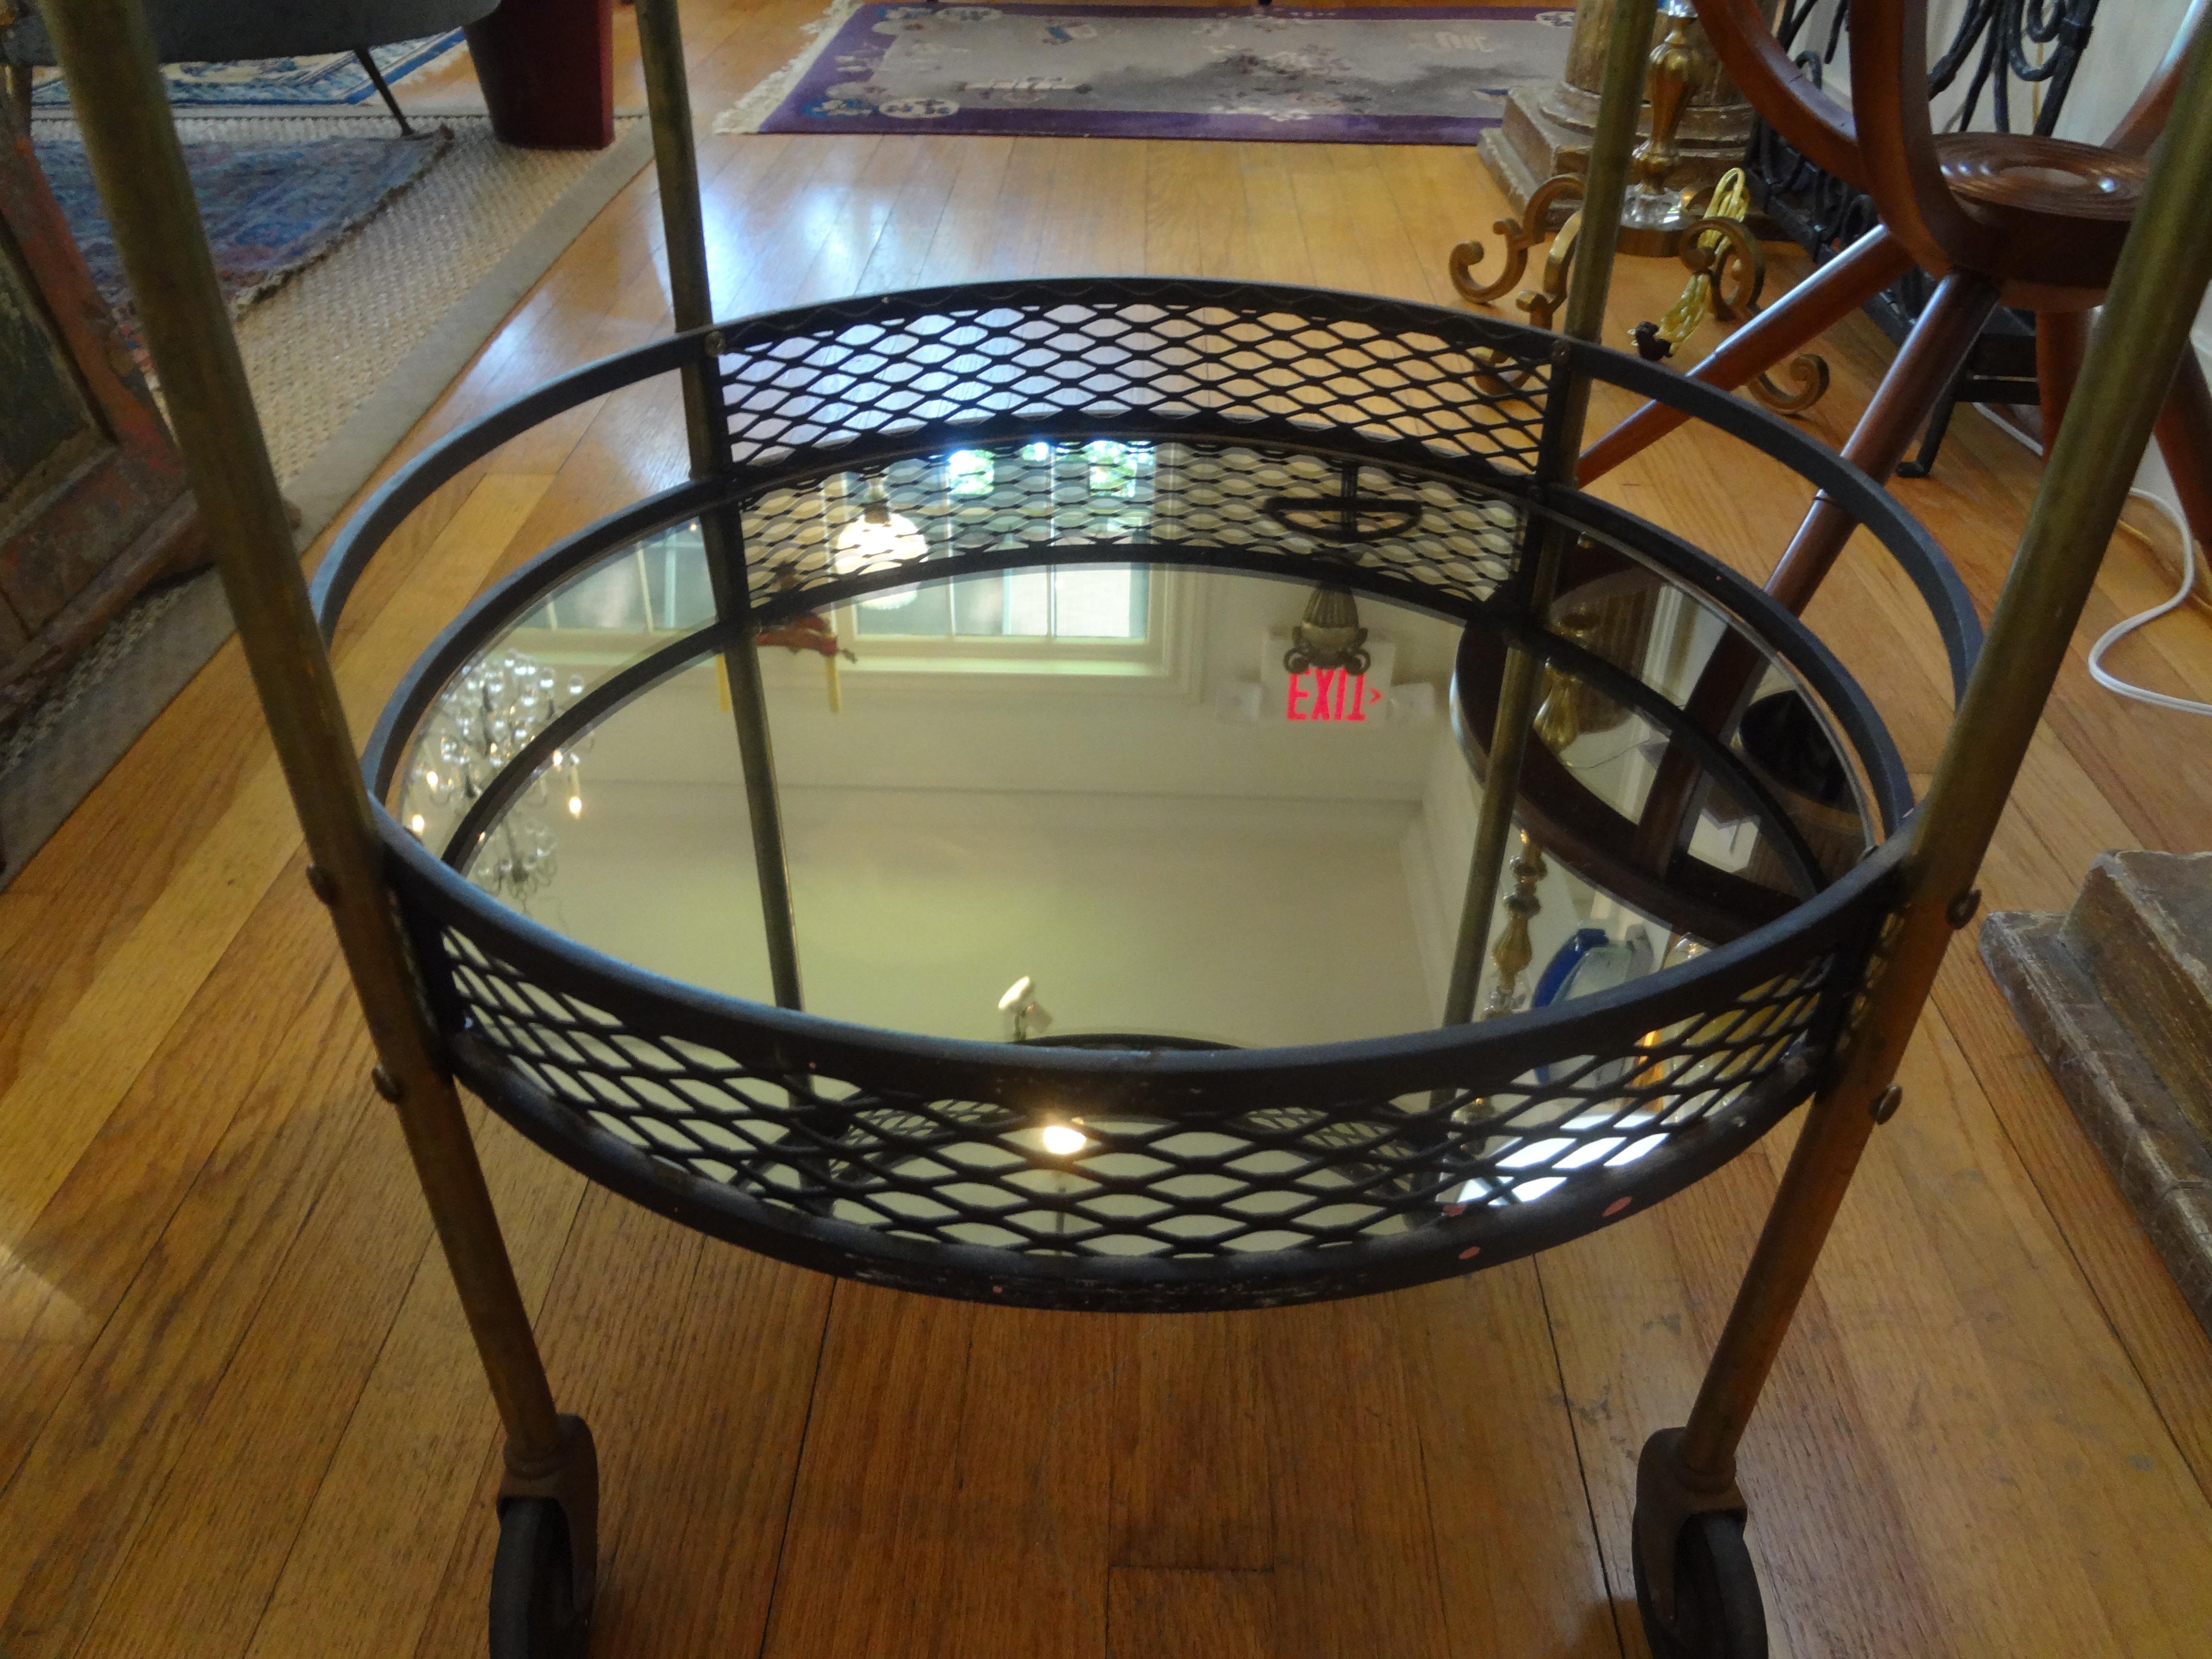 Interesting French iron and brass bar cart, drinks cart or drinks trolley attributed to Mathieu Matégot. This French Mid-Century Modernist round cart has a new glass top and mirrored bottom tier and dates to the 1960s. This versatile cart could be